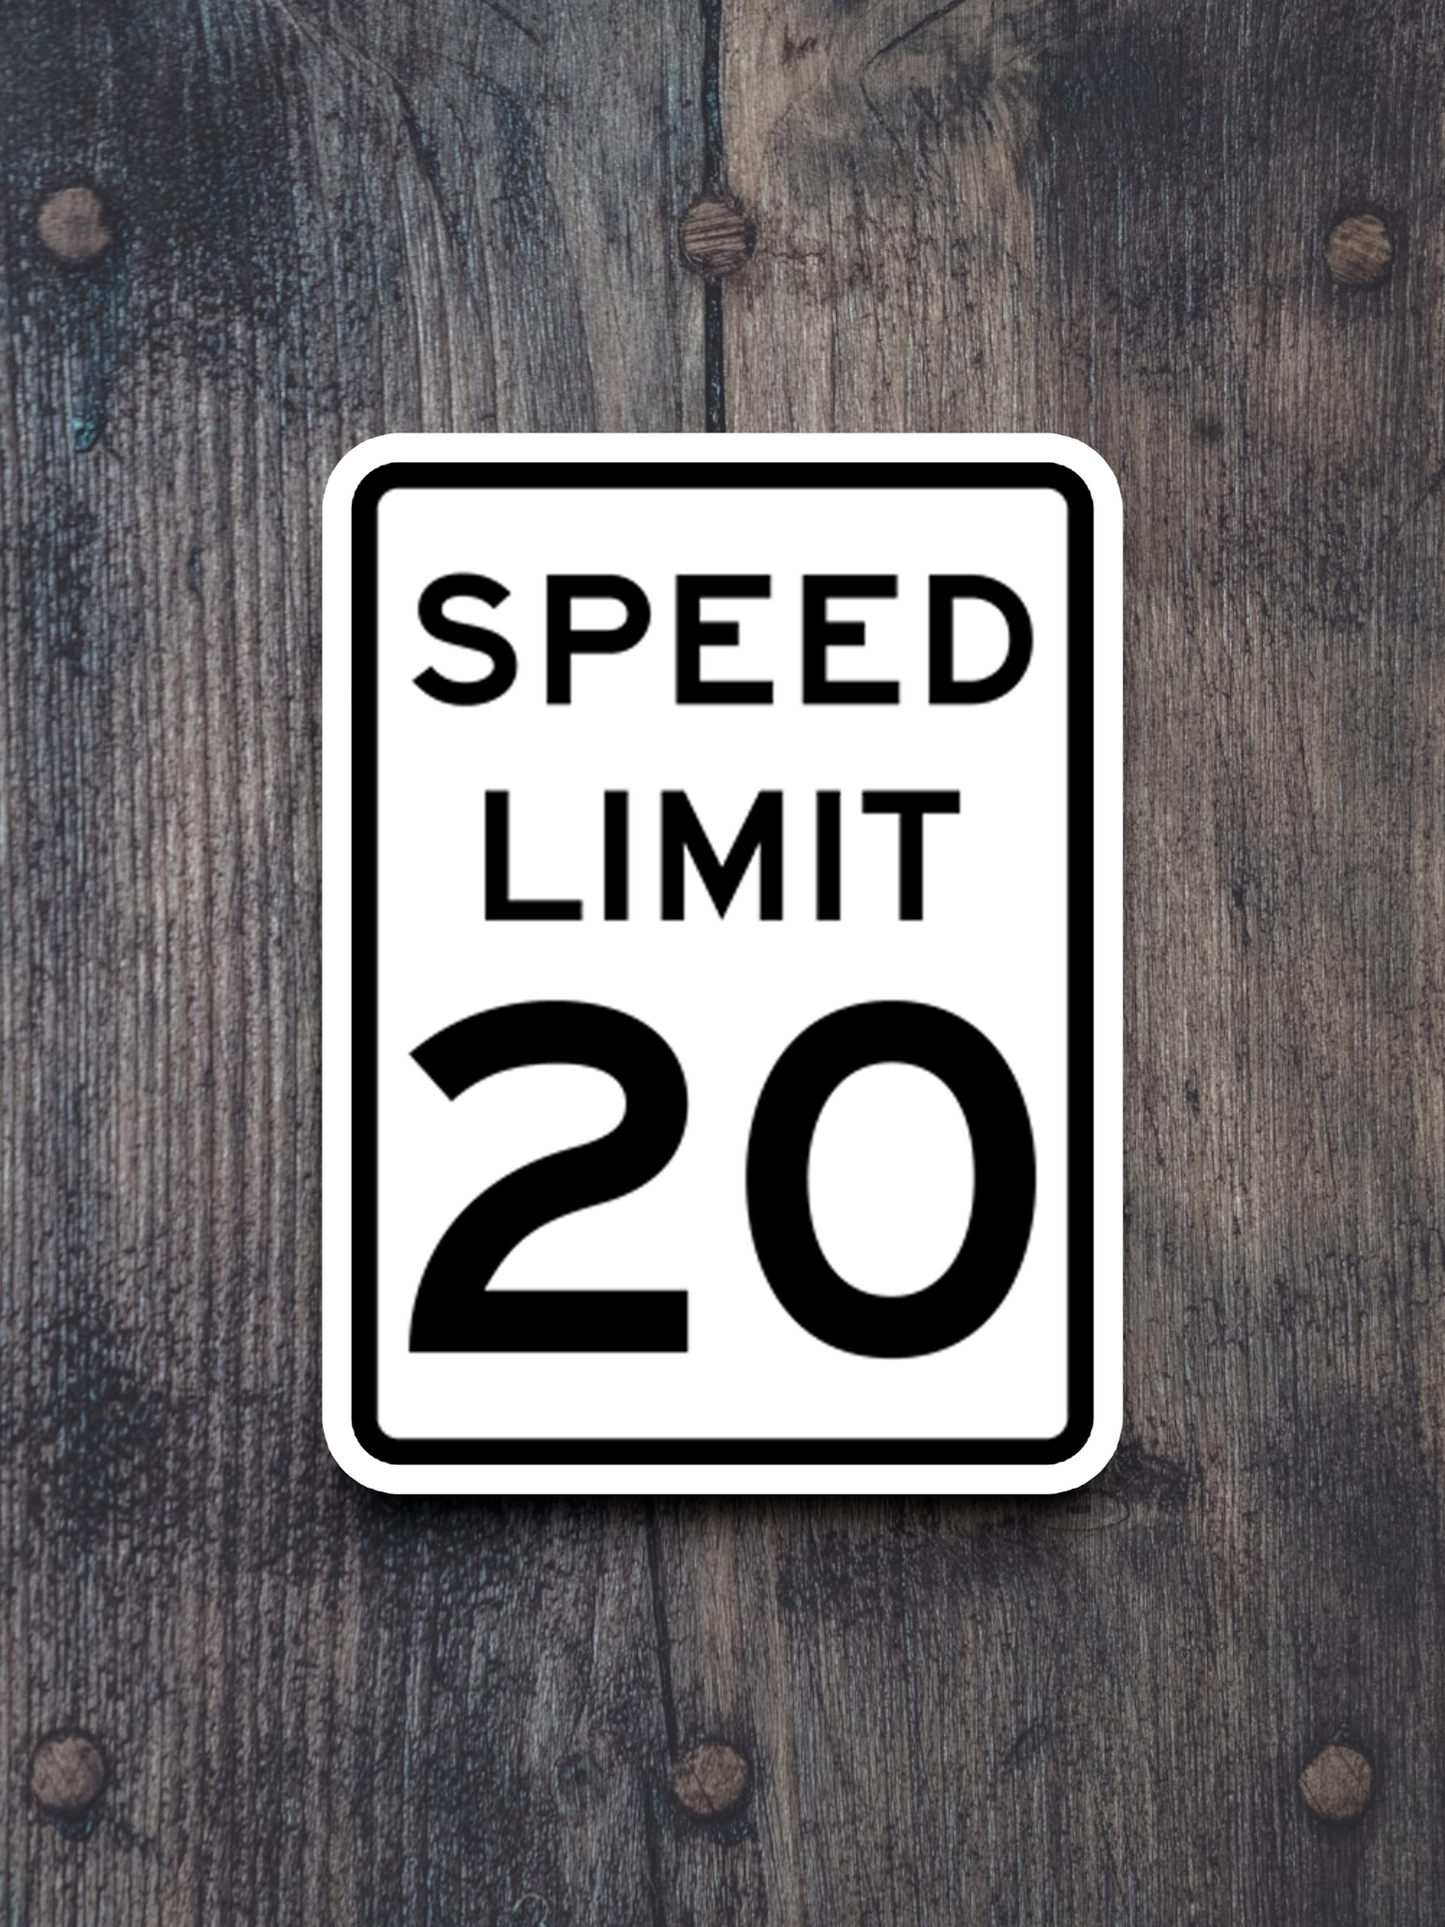 20 Miles Per Hour Speed Limit Road Sign Sticker